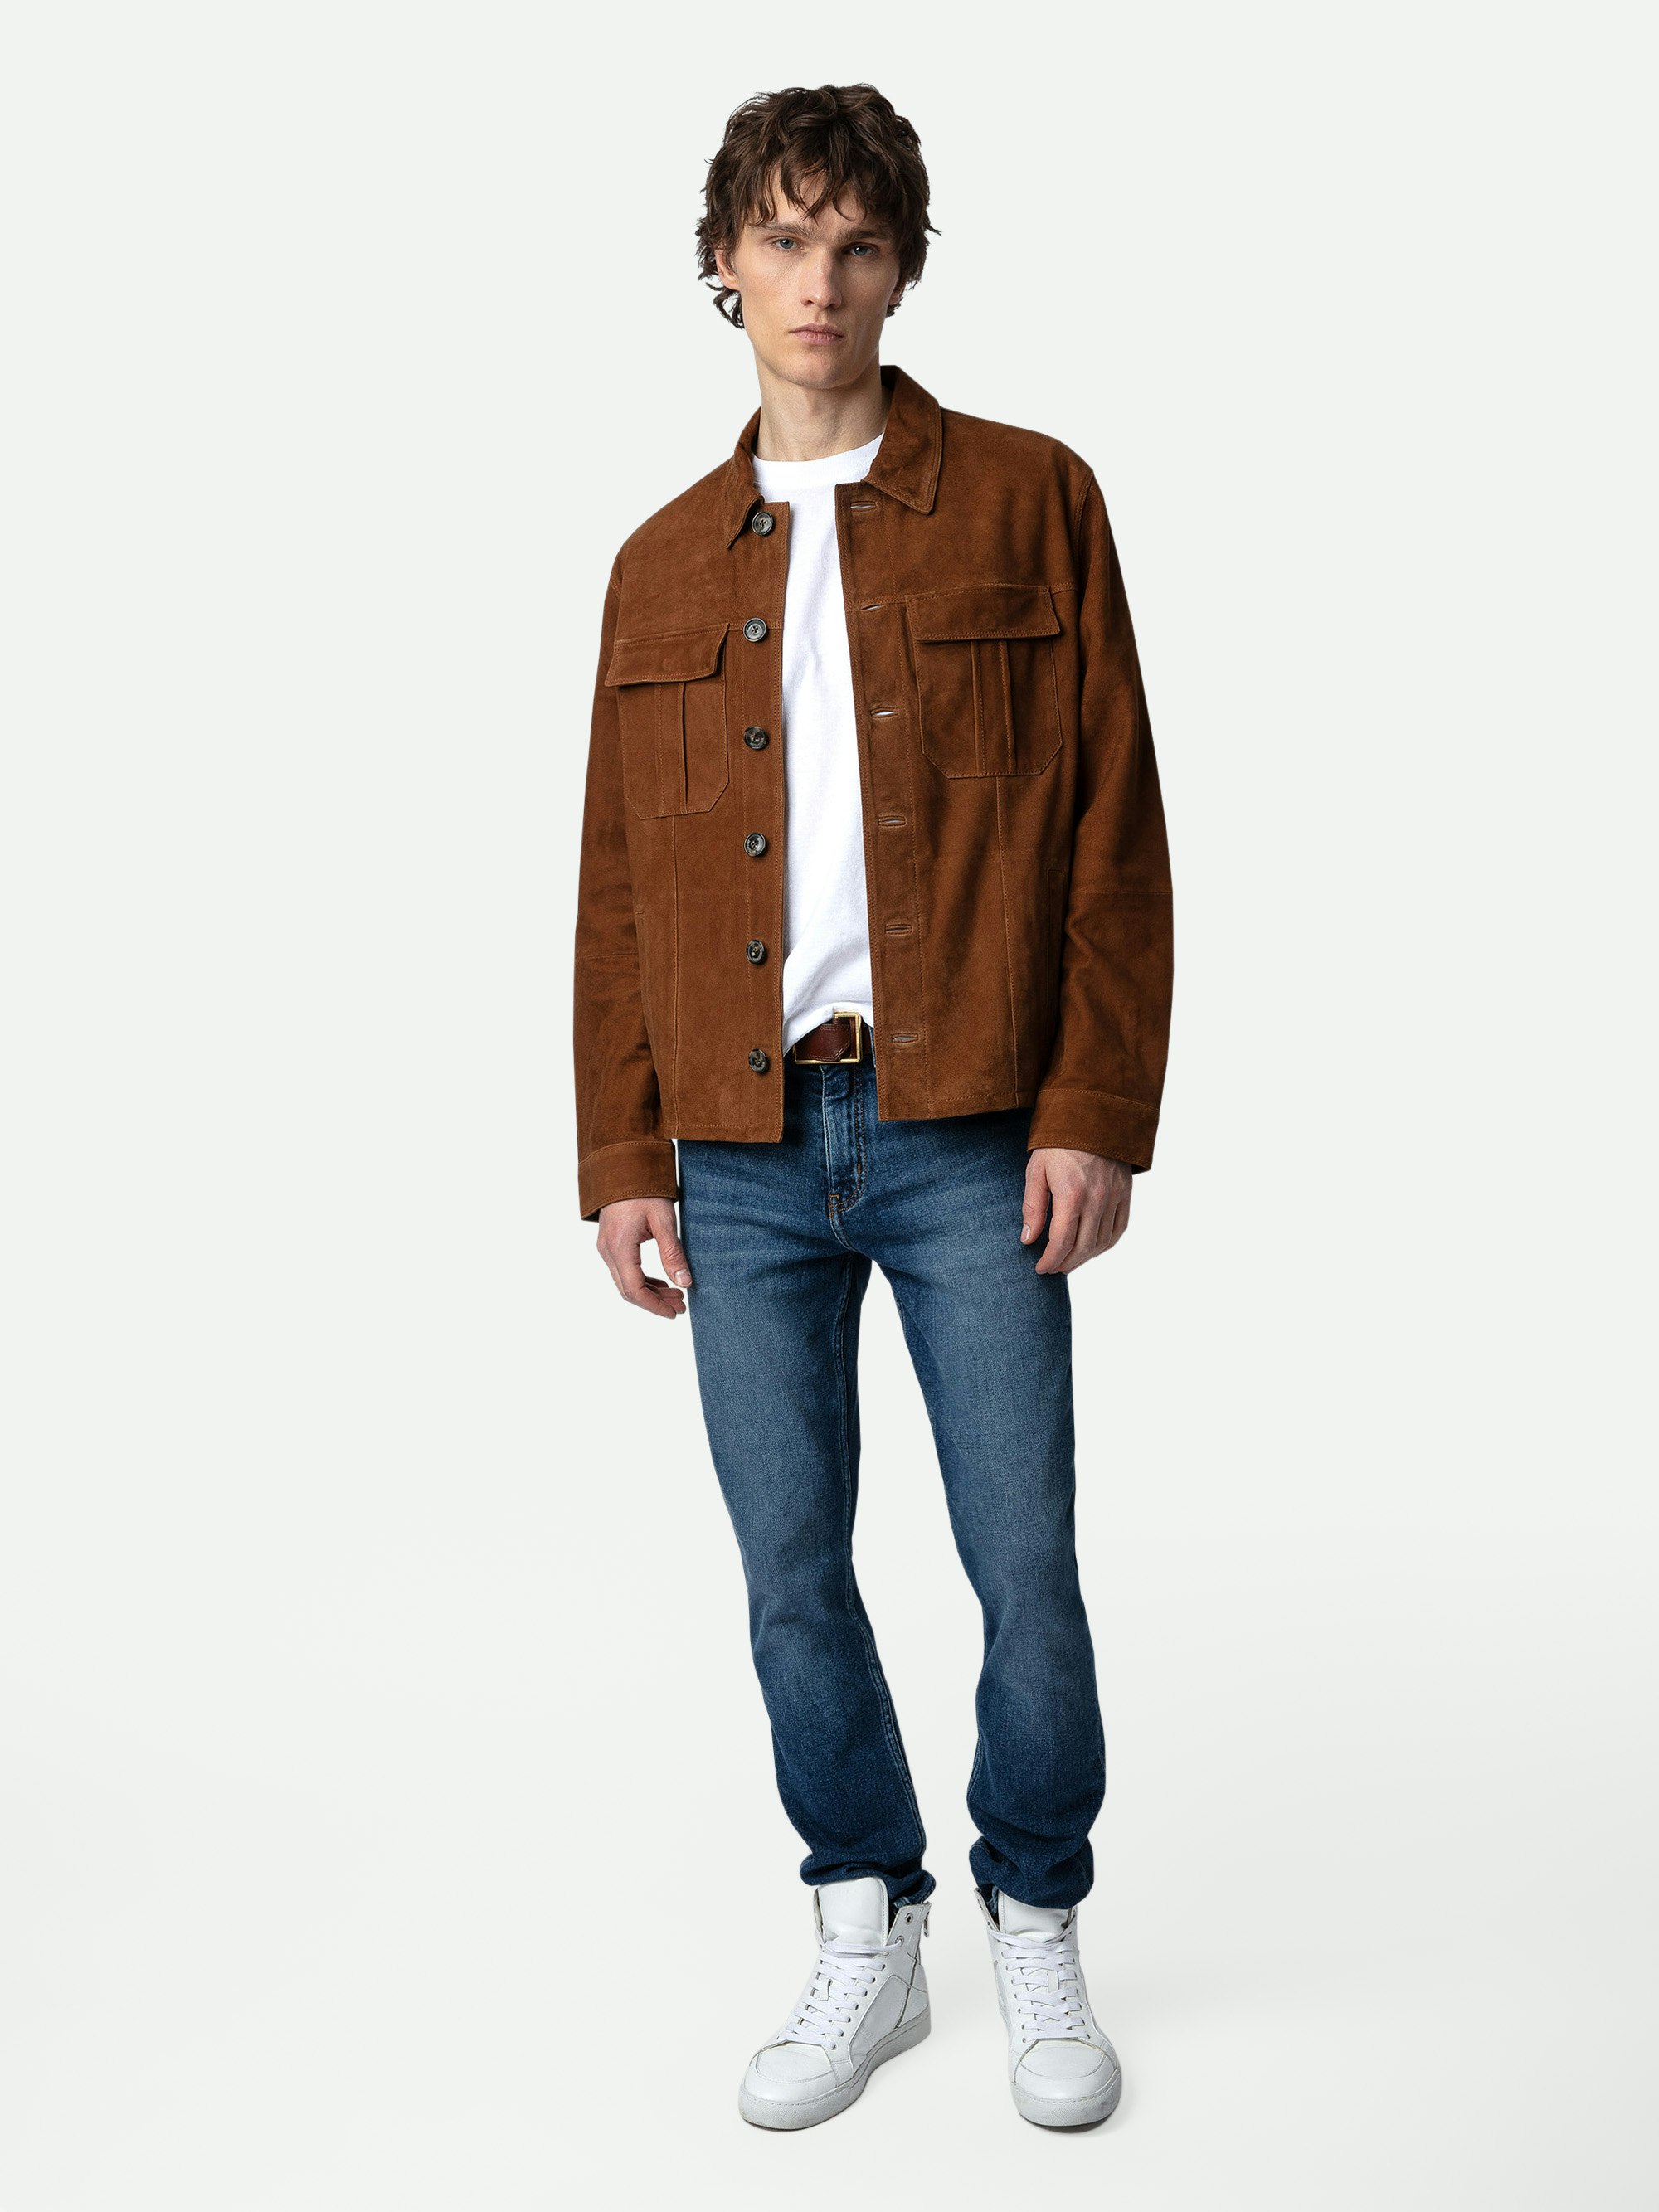 Kuba Suede Jacket - Cognac suede jacket with button closure and pockets.